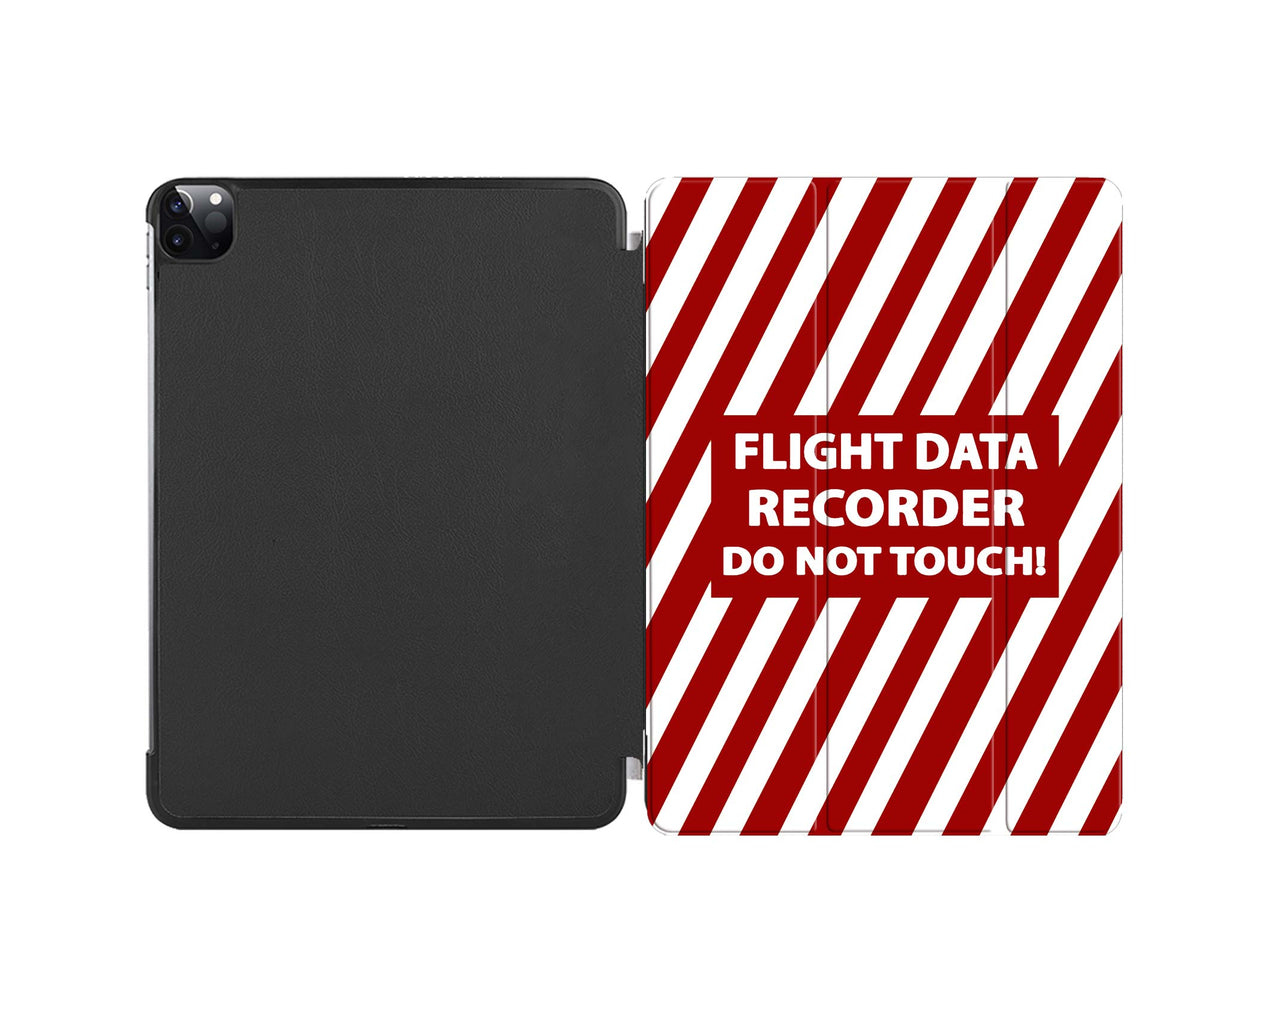 Flight Data Recorder Do Not TOUCH Designed iPad Cases